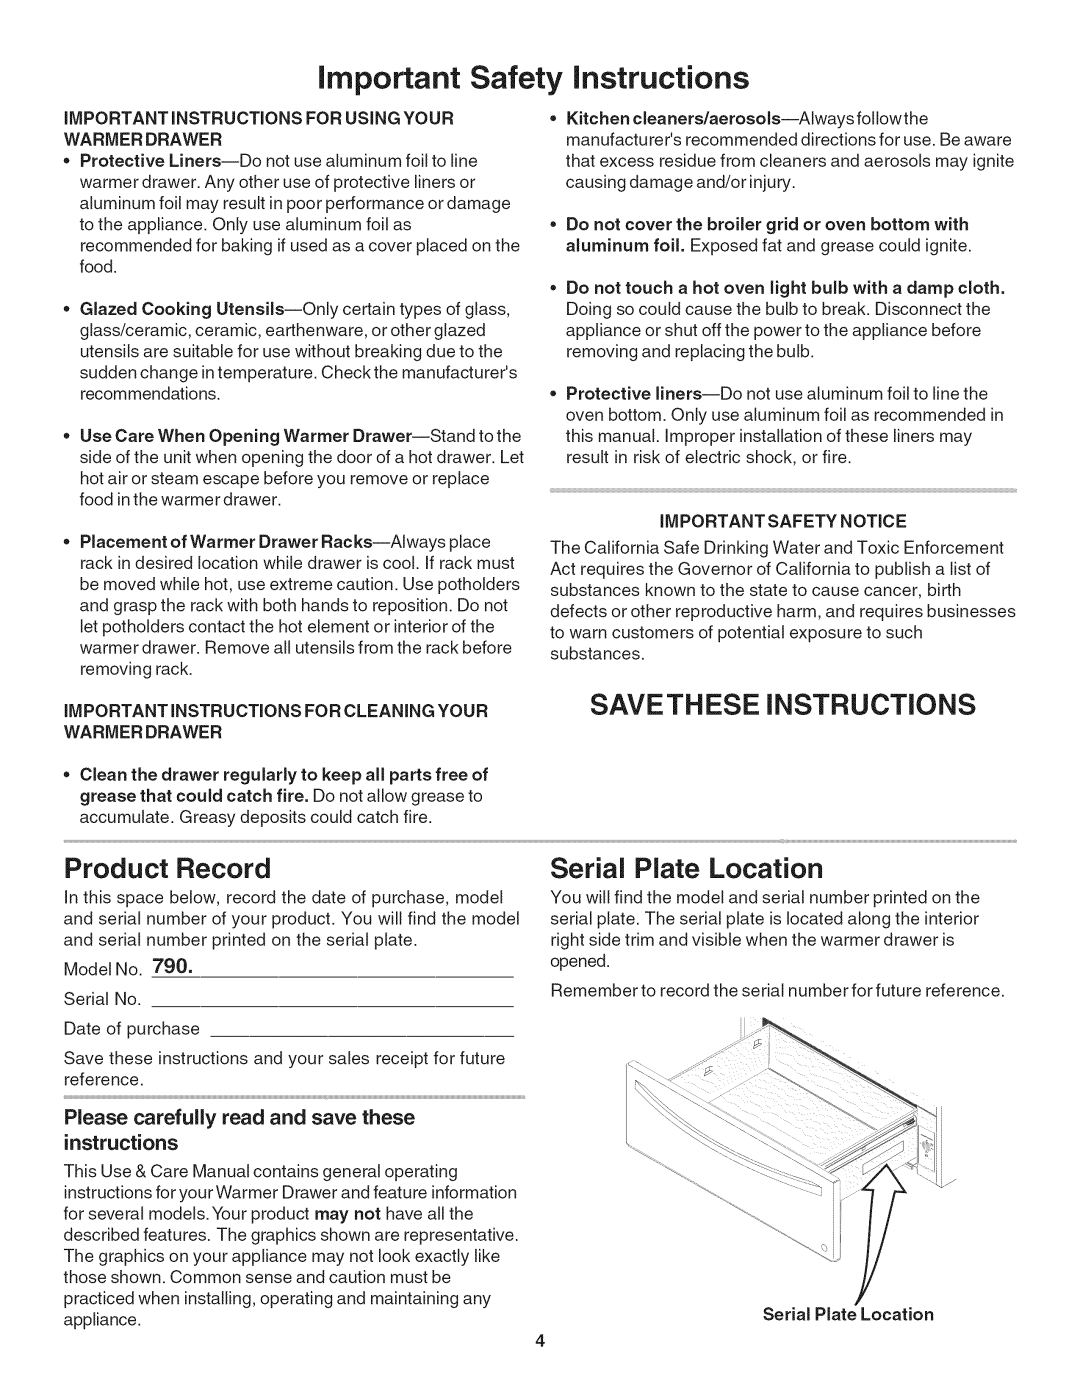 Kenmore 790.4918, 790.4921 Savethese Instructions, Product Record, Serial Plate Location, important Safety instructions 